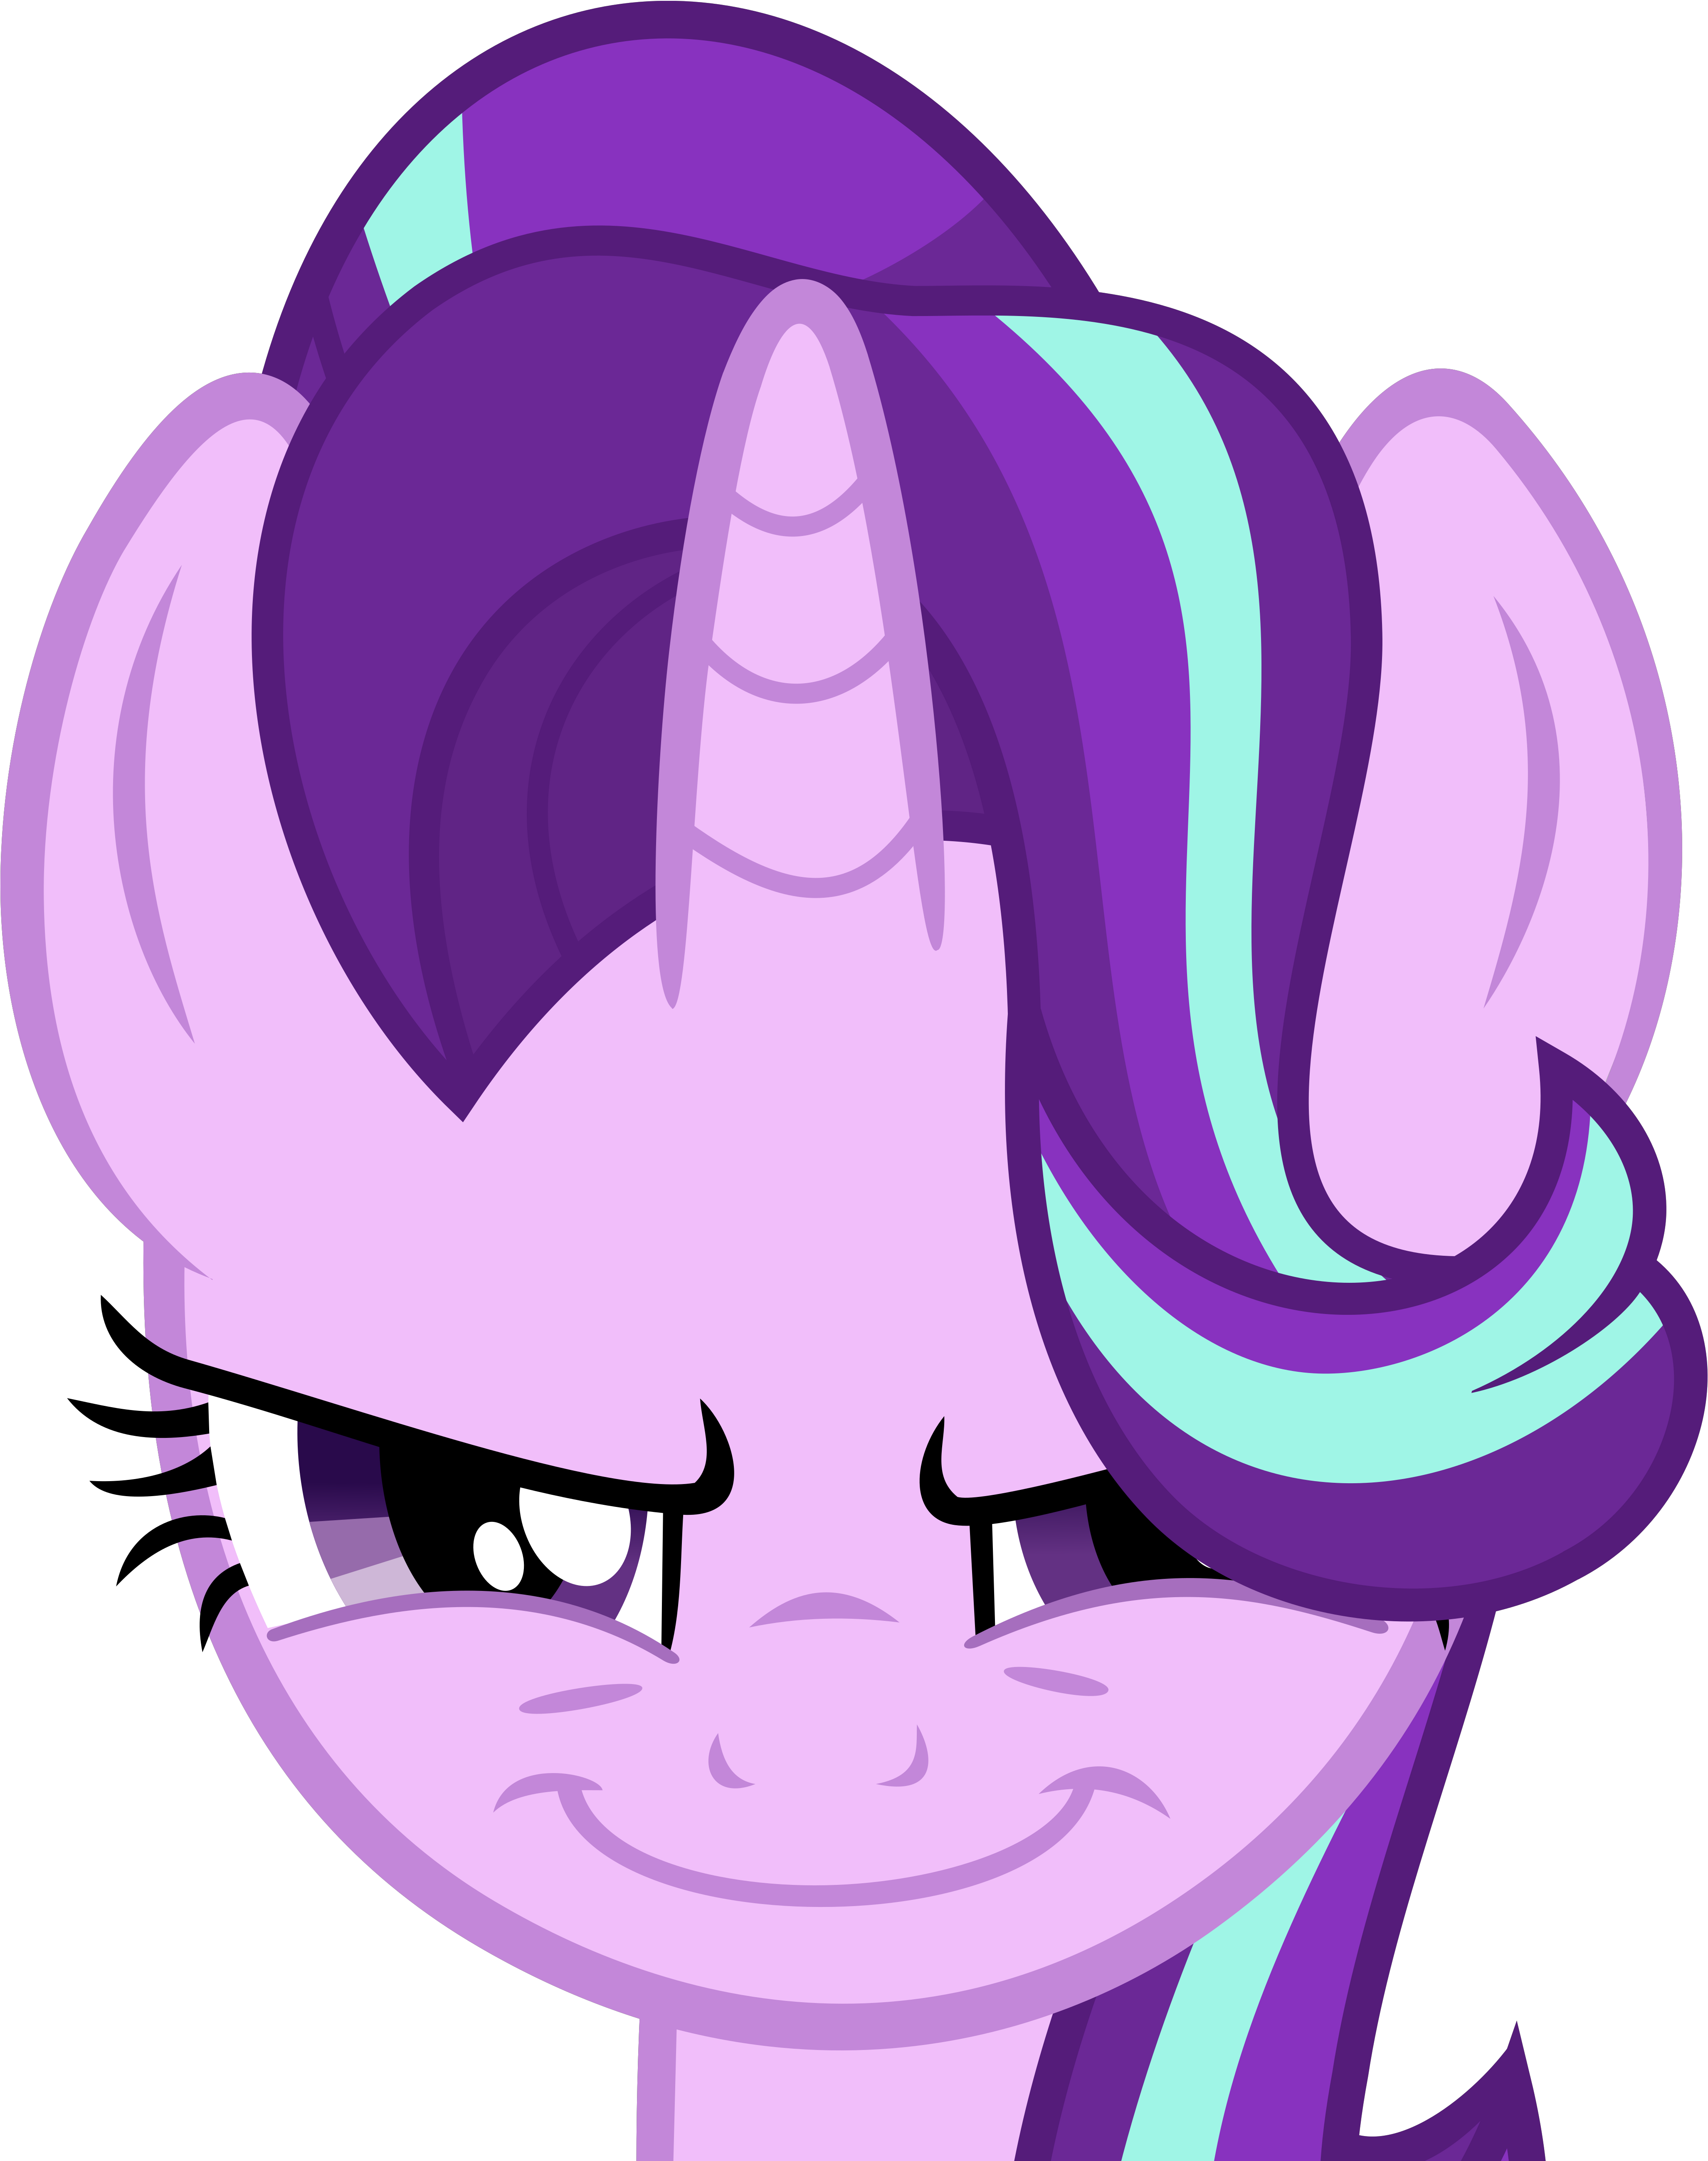 Slb94, Evil Grin, Purple, Safe, Simple Background, - Want That Cutie Mark (4428x5244)